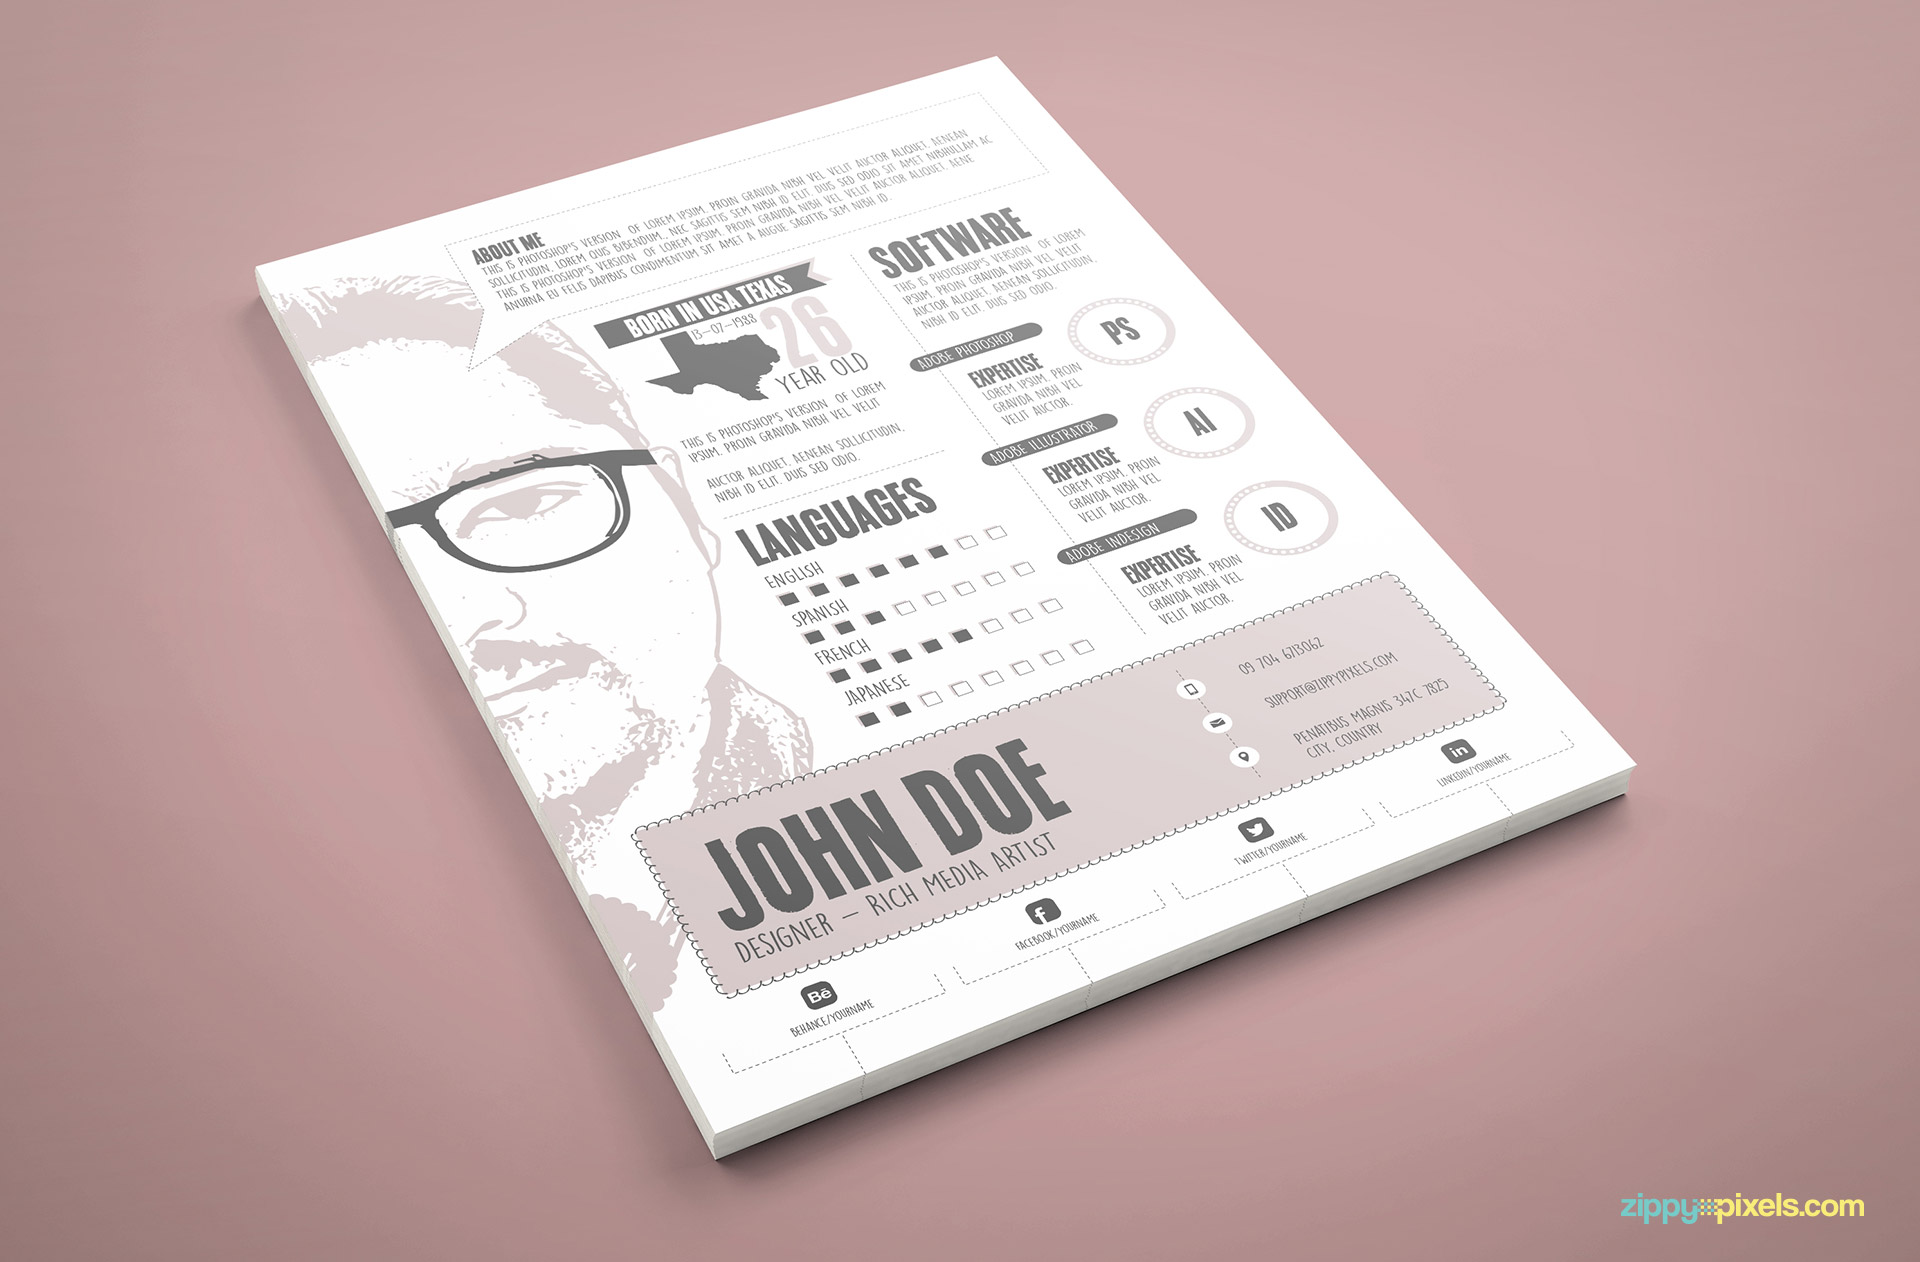 Two Page Designer Resume/CV Template in Sketch Art Style